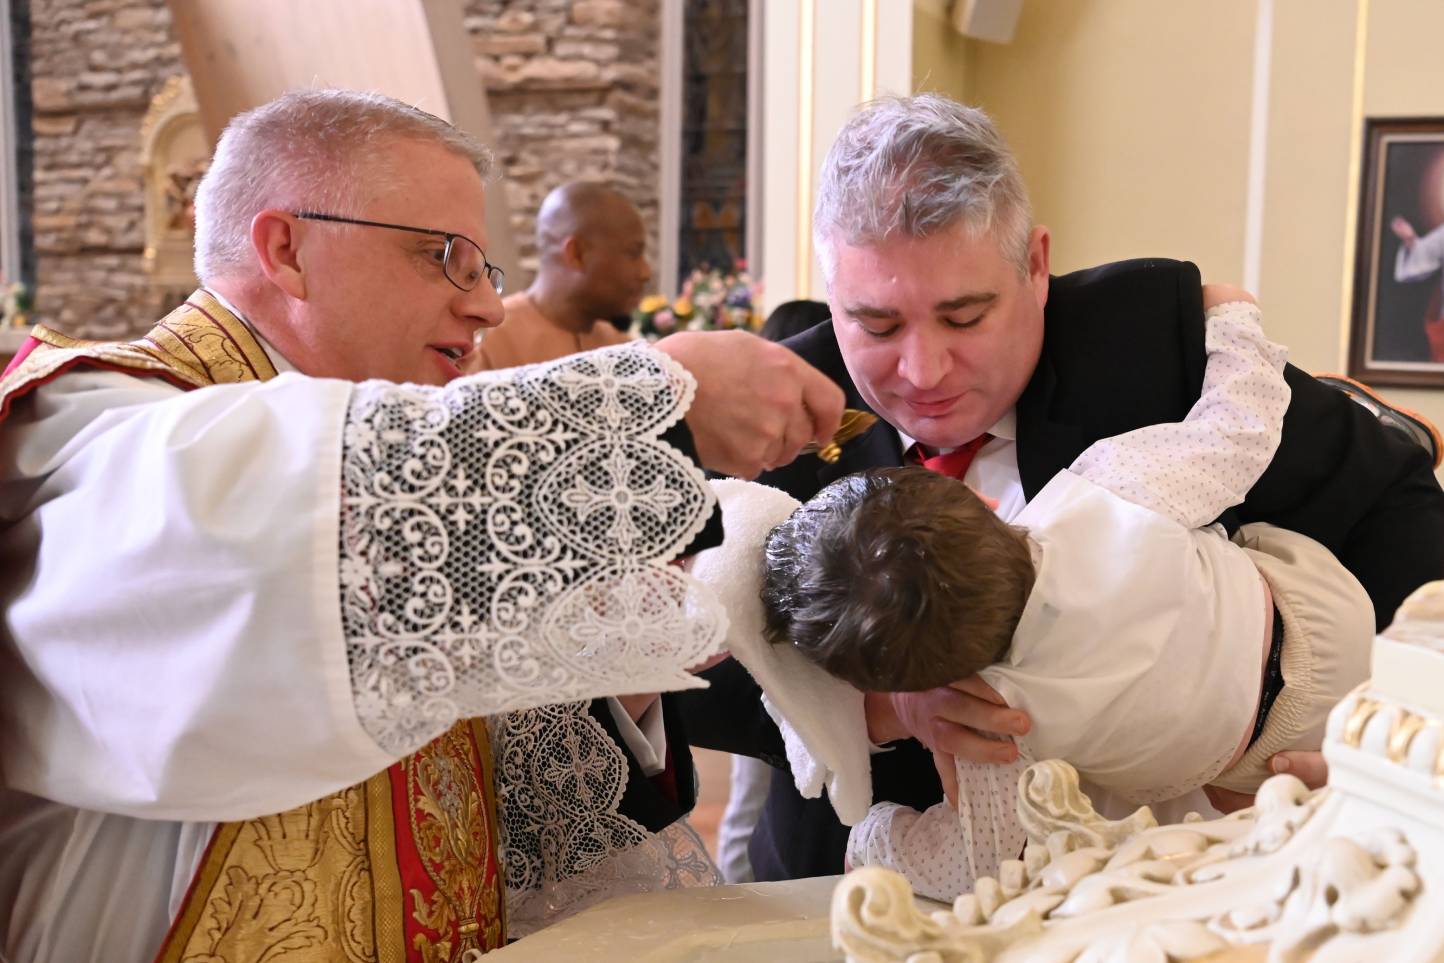 A priest is feeding the bride 's cake.